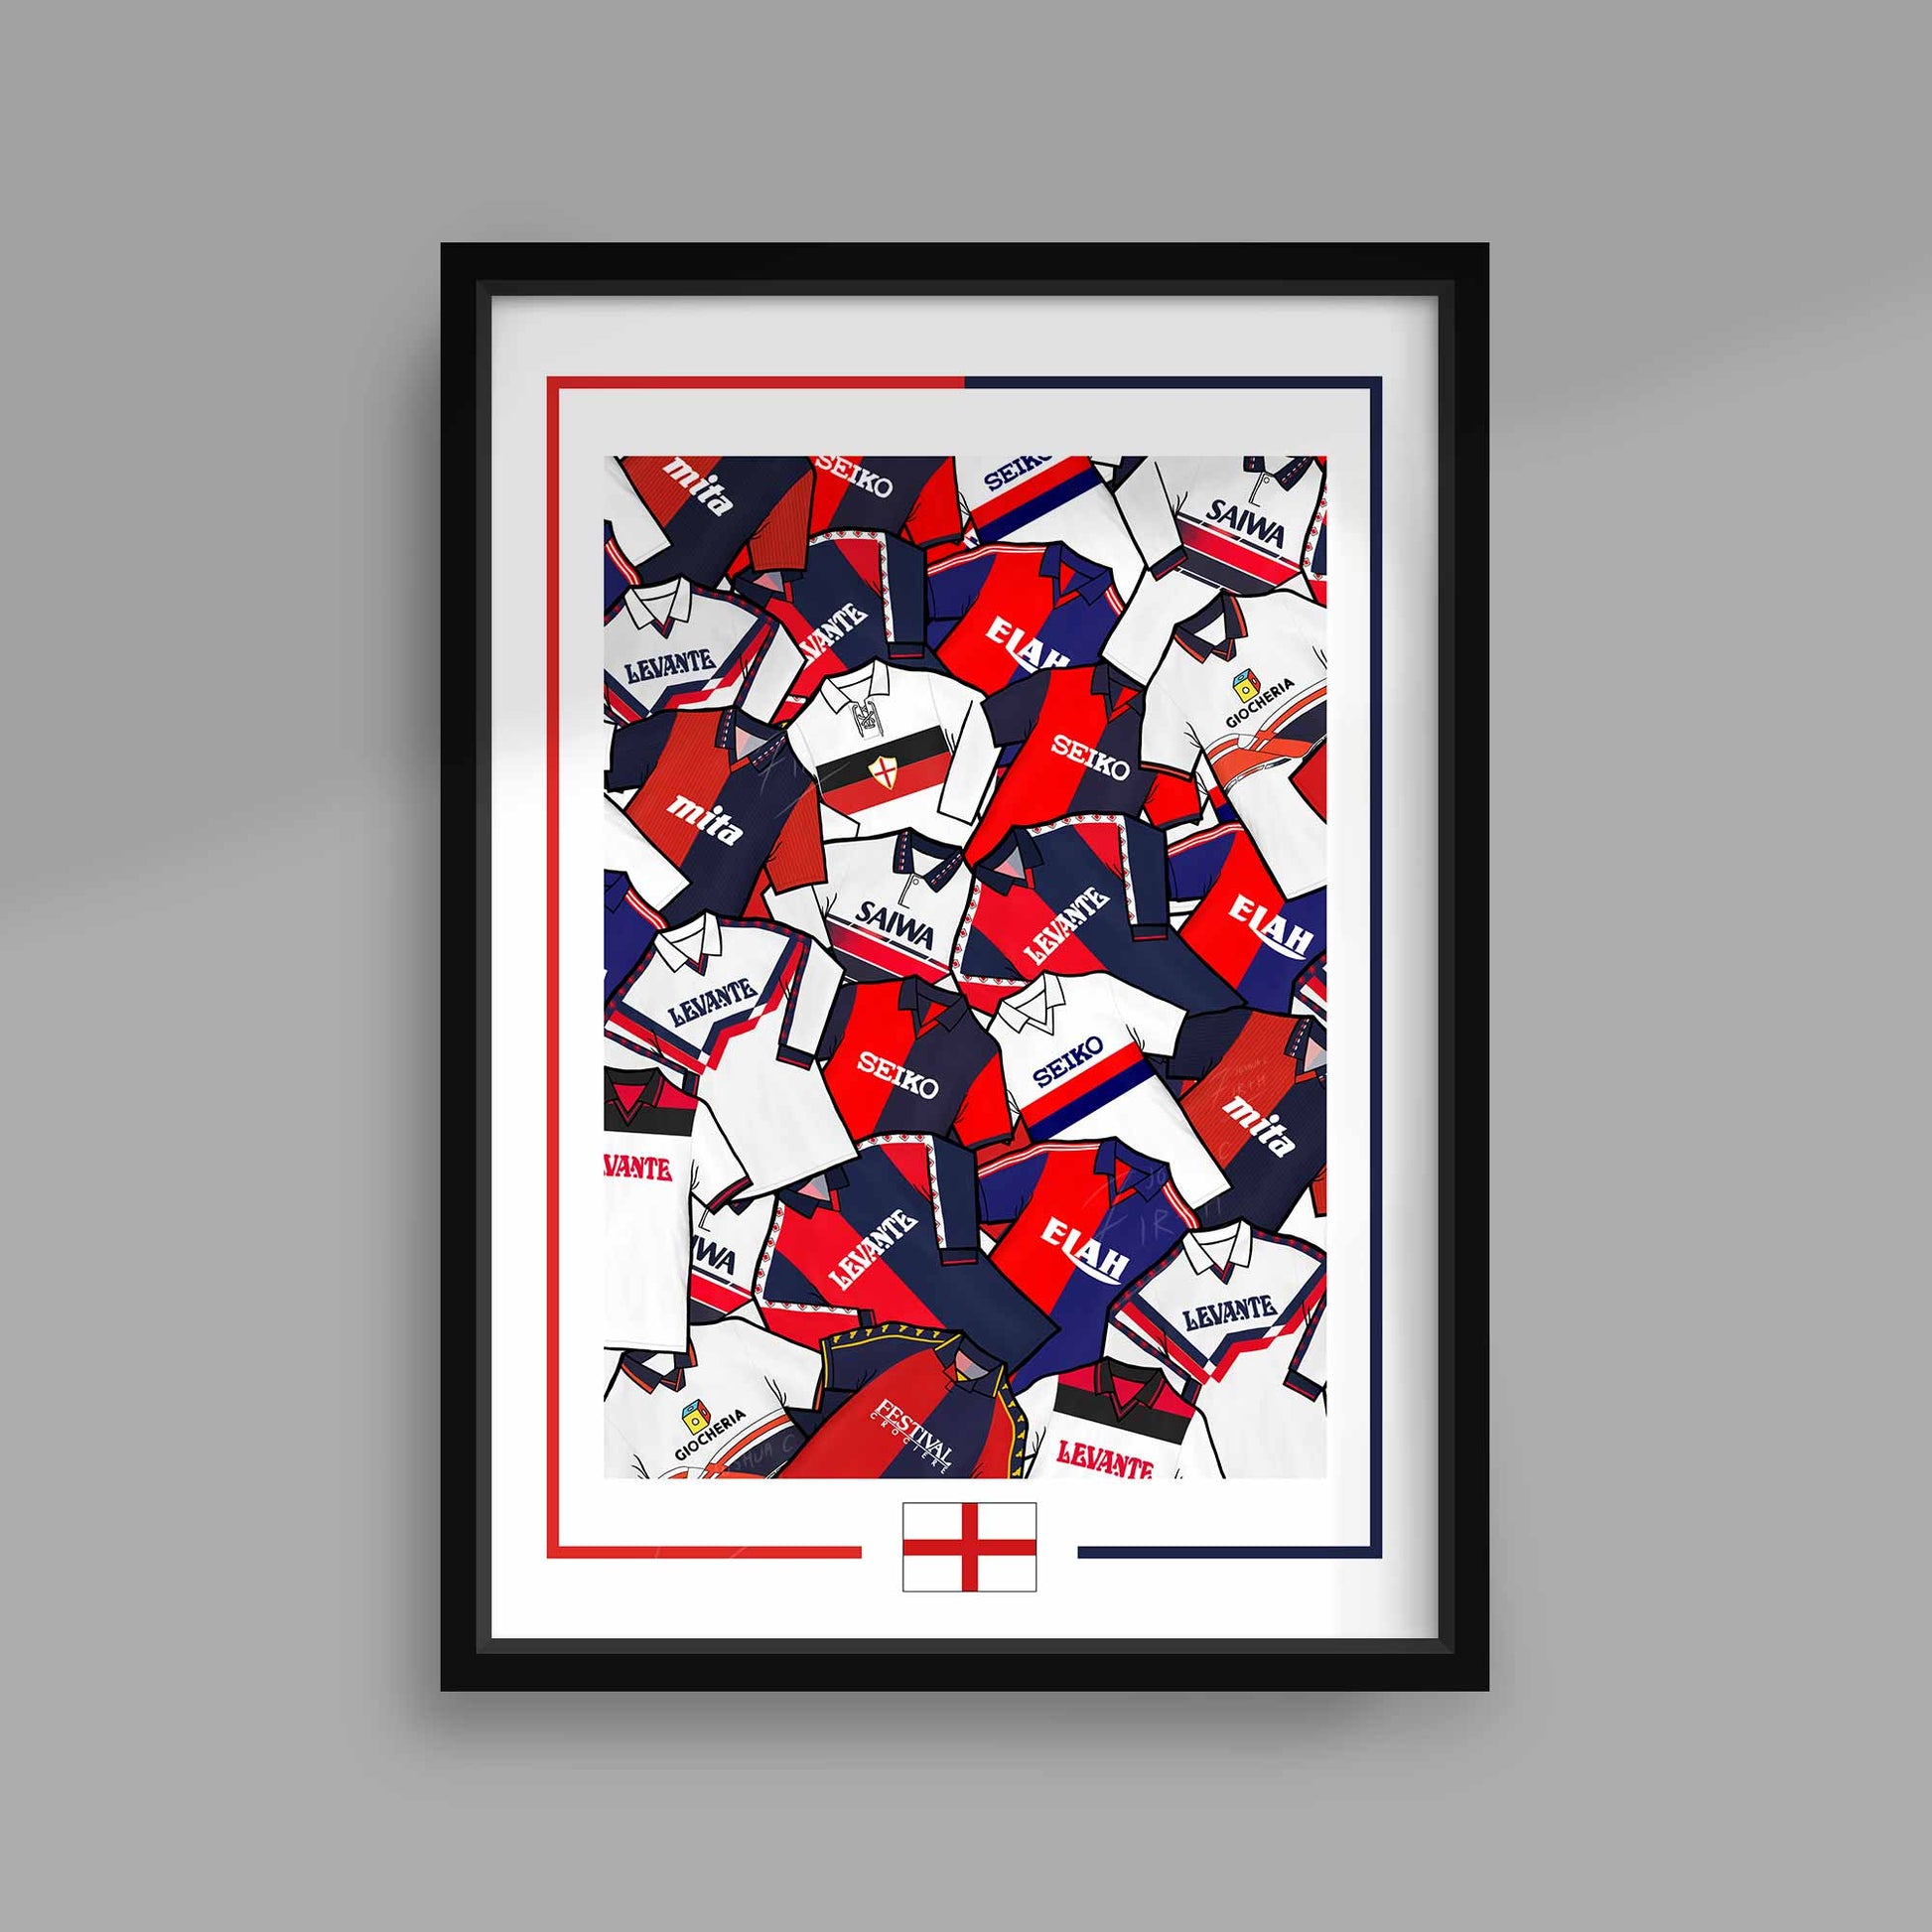 Celebrate Genoa CFC iconic vintage shirts with this poster print artwork. Featuring retro designs that capture the essence of the club's history